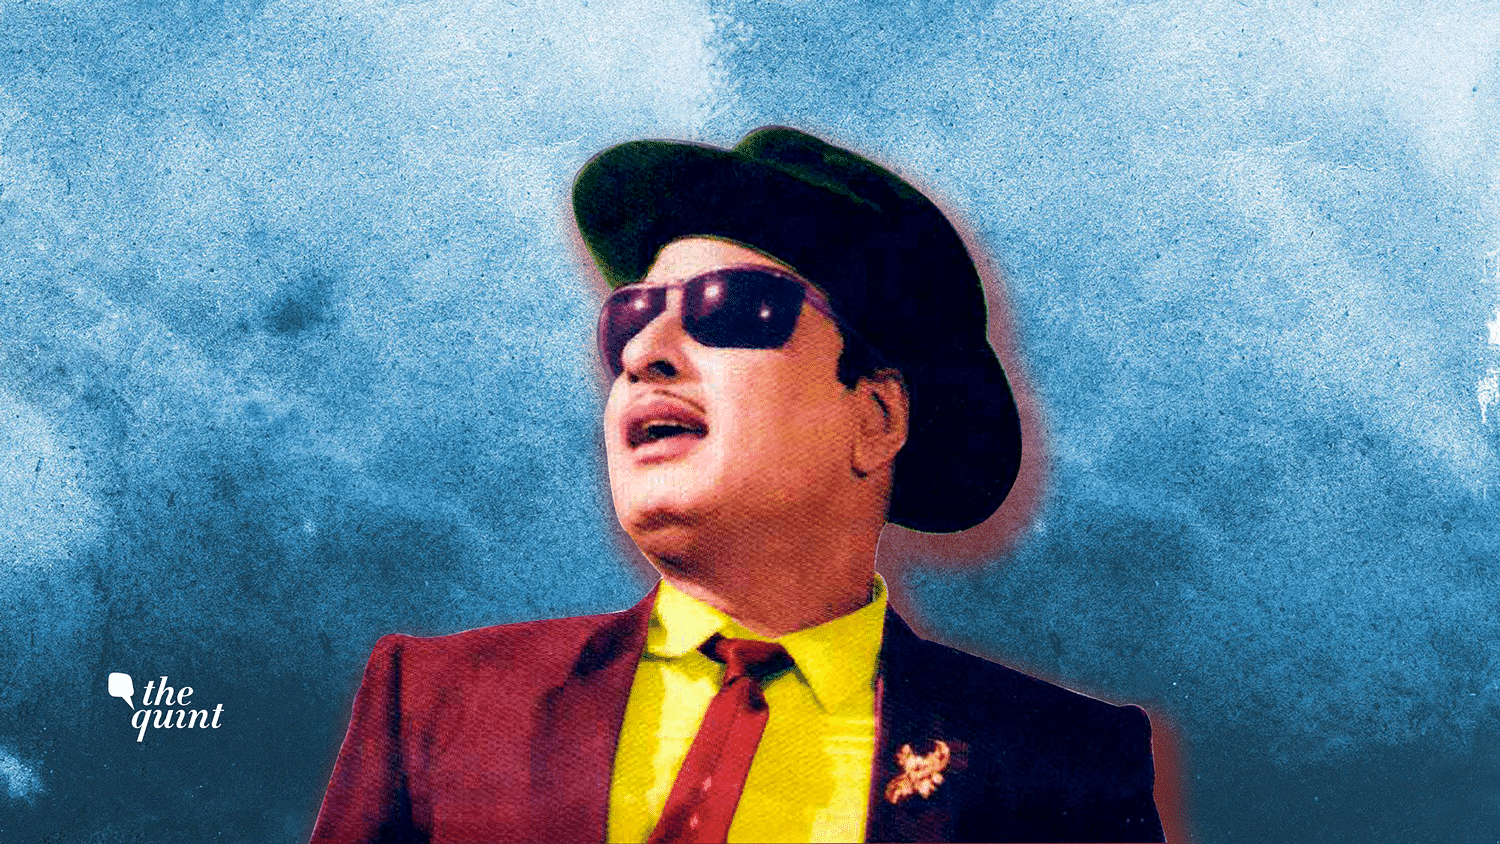 Image of Tamil Nadu’s late superstar and  politician MGR used for representational purposes.